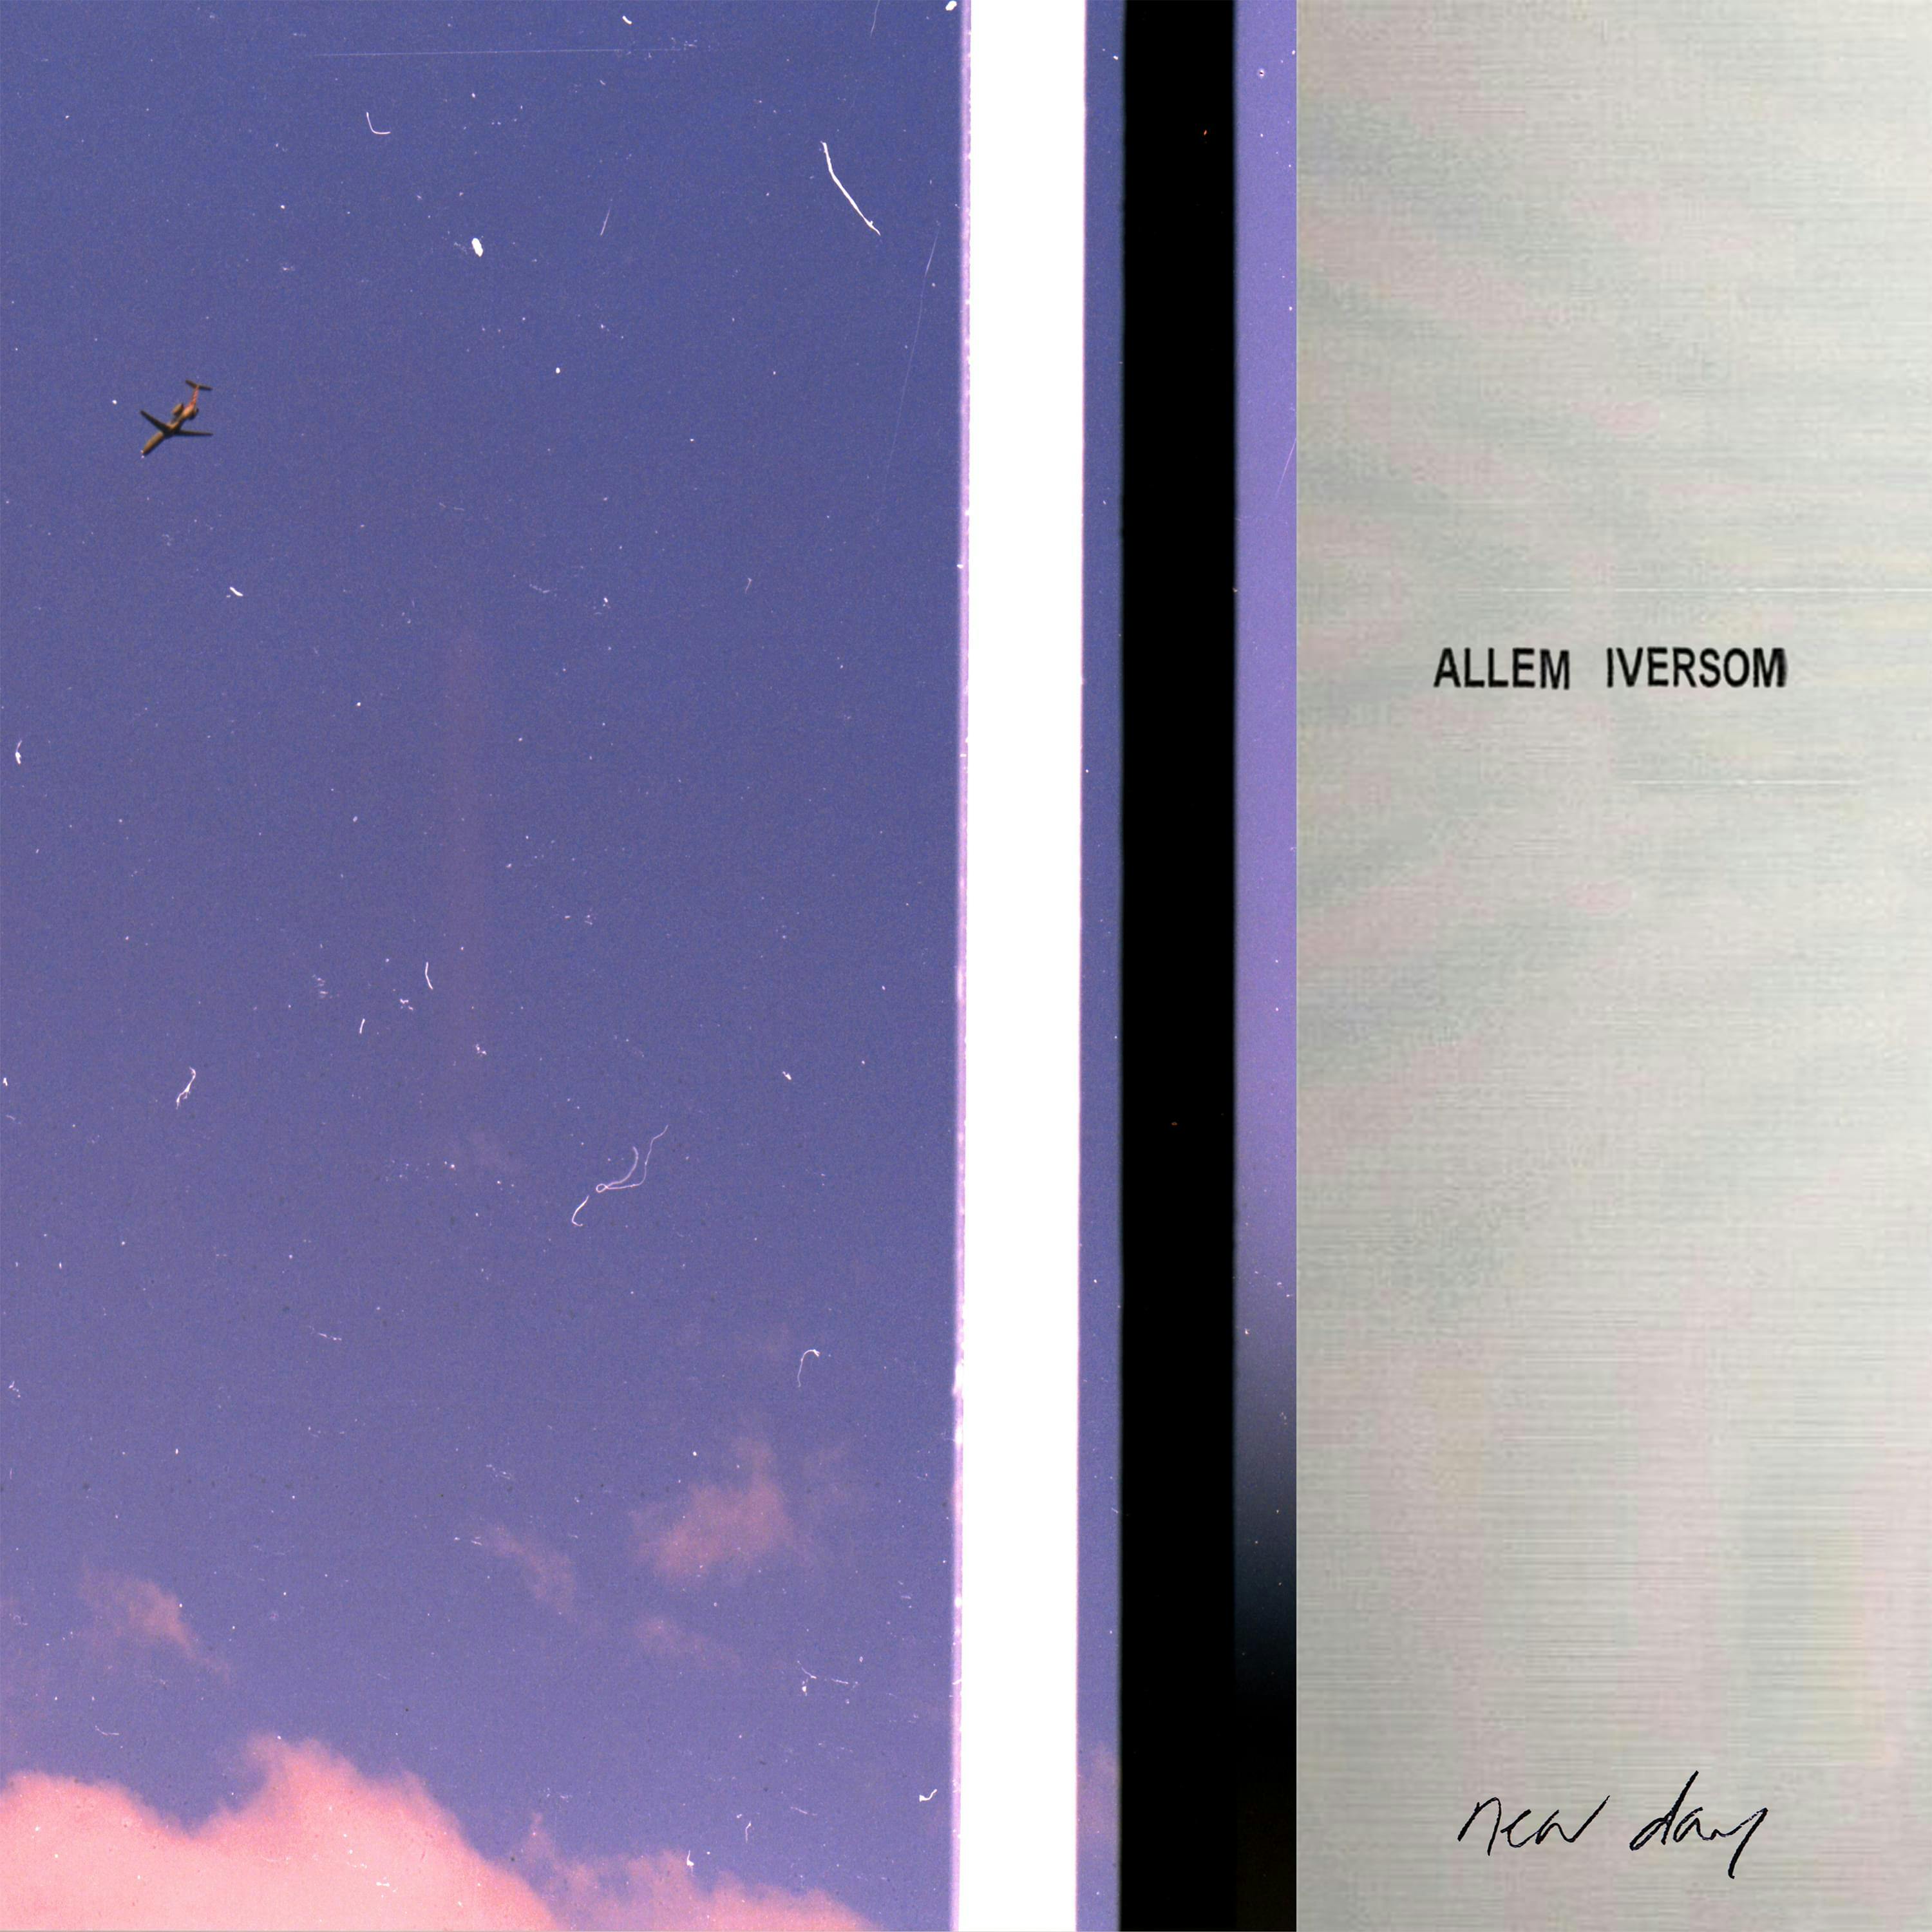 Cover art for allem iversom's song: its a new day